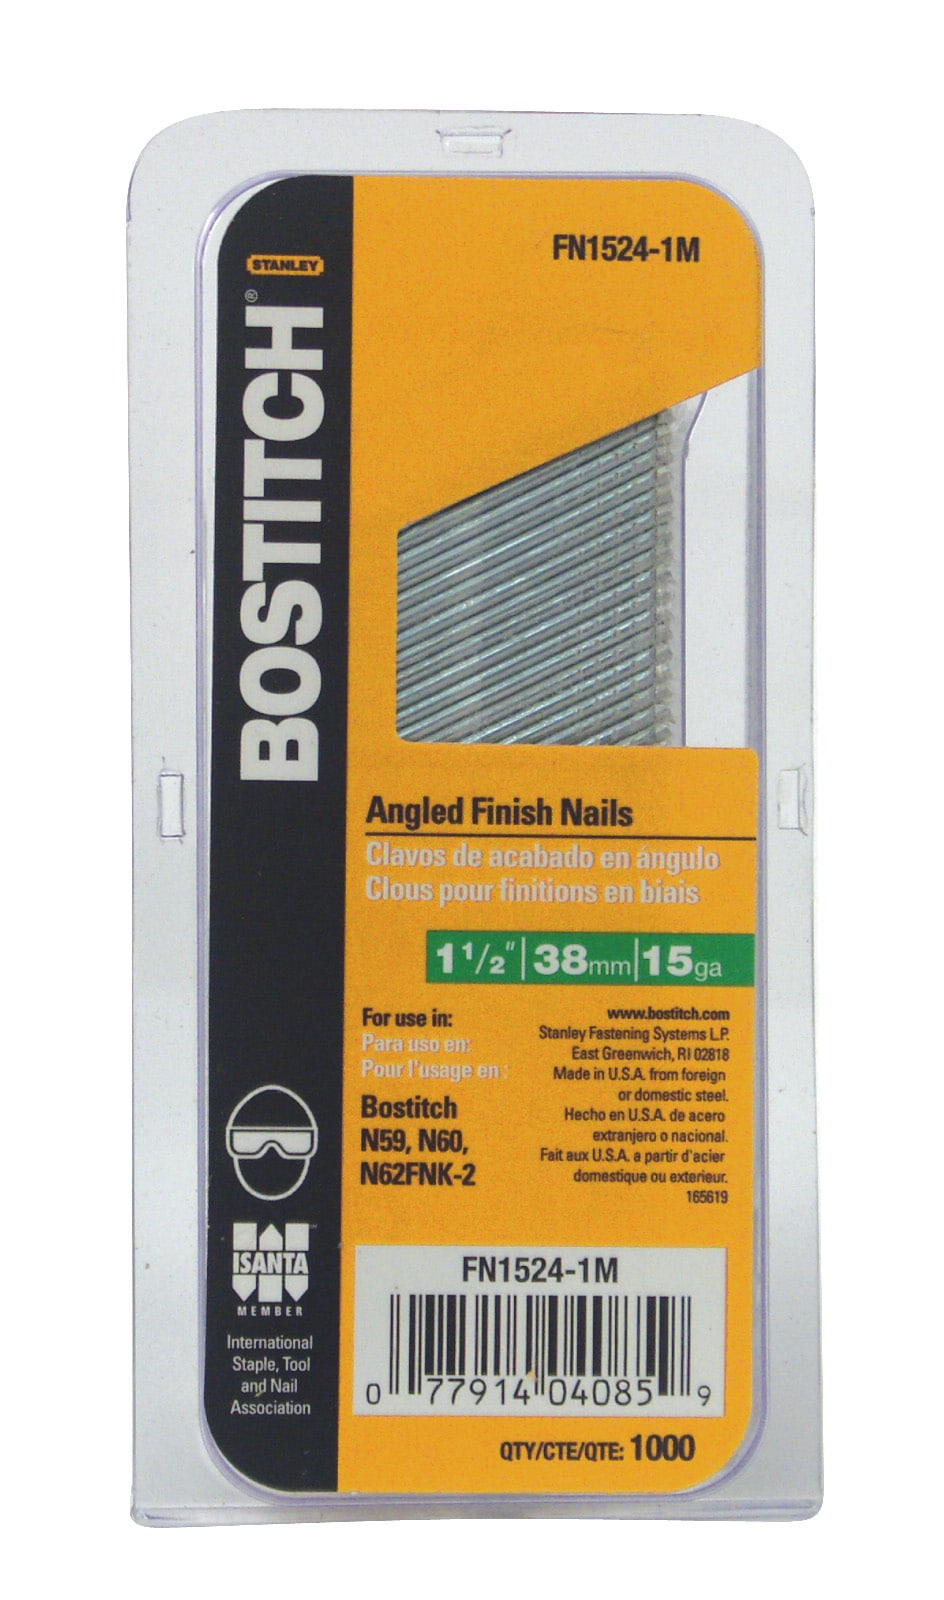 Metabo HPT 2-1/2-in 16-Gauge Straight Galvanized Collated Finish Nails  (1000-Per Box) in the Brads & Finish Nails department at Lowes.com